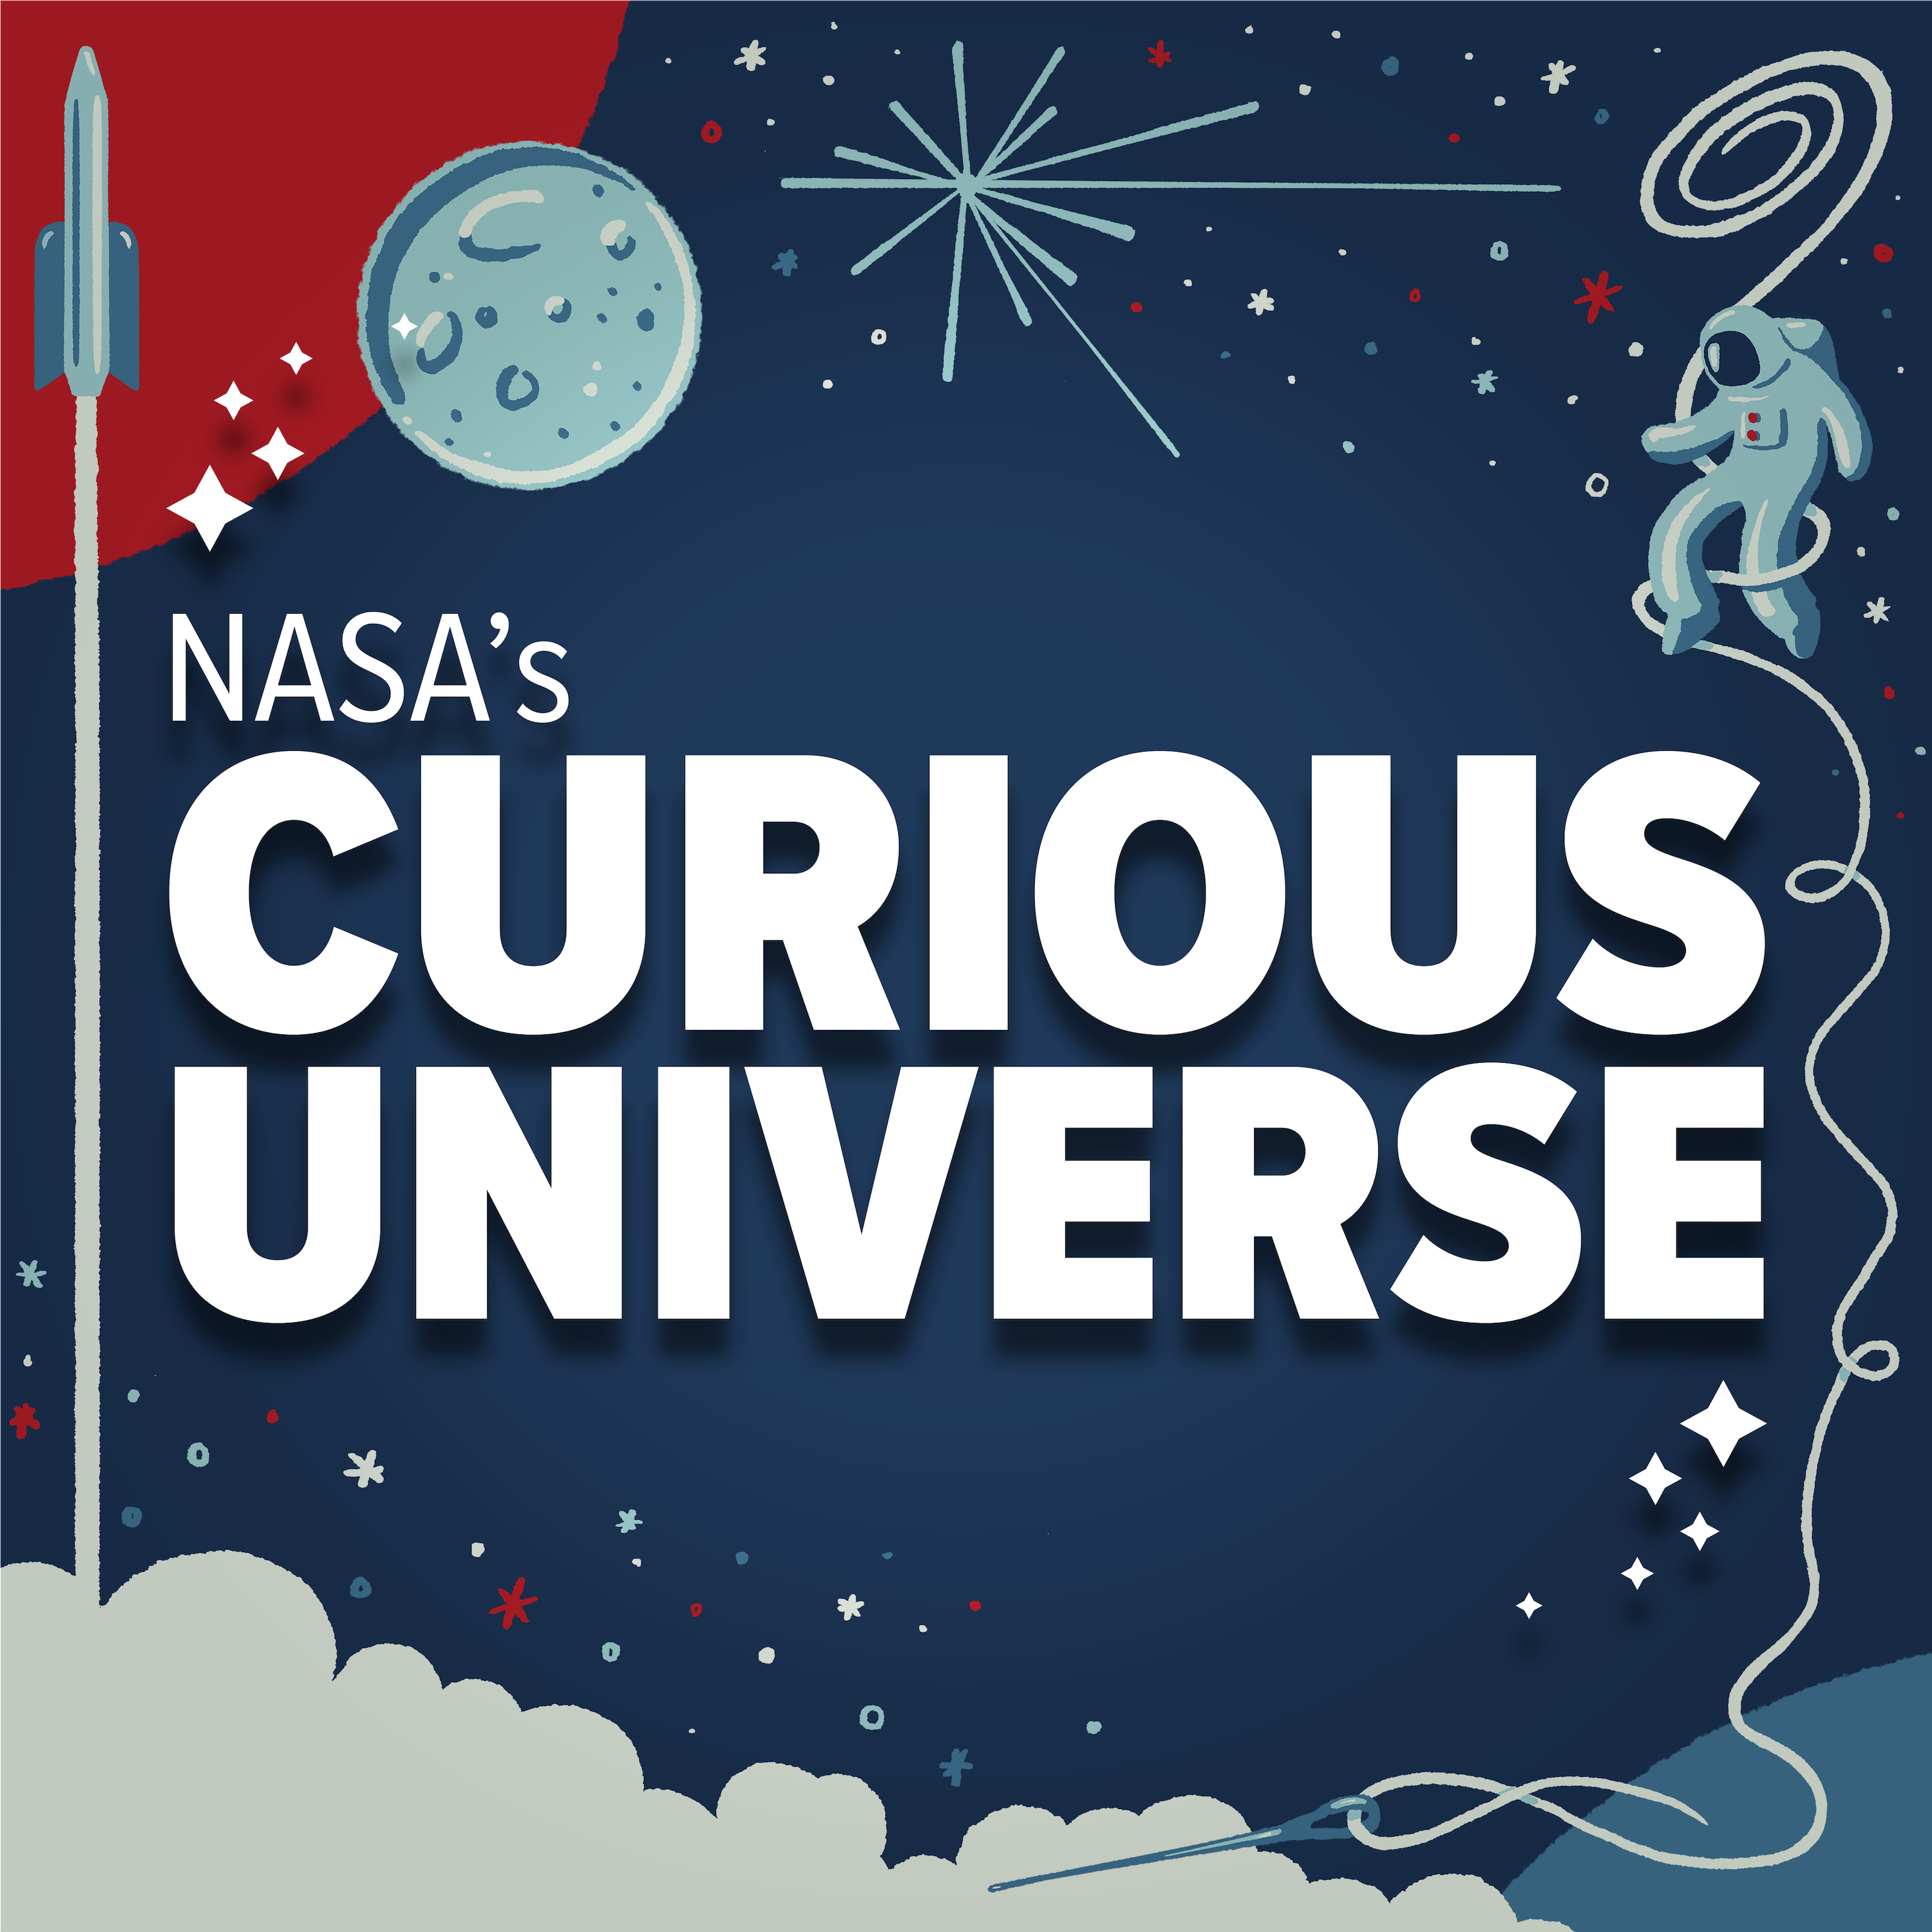 Curious Universe: Introducing the Webb Space Telescope Mini-Series